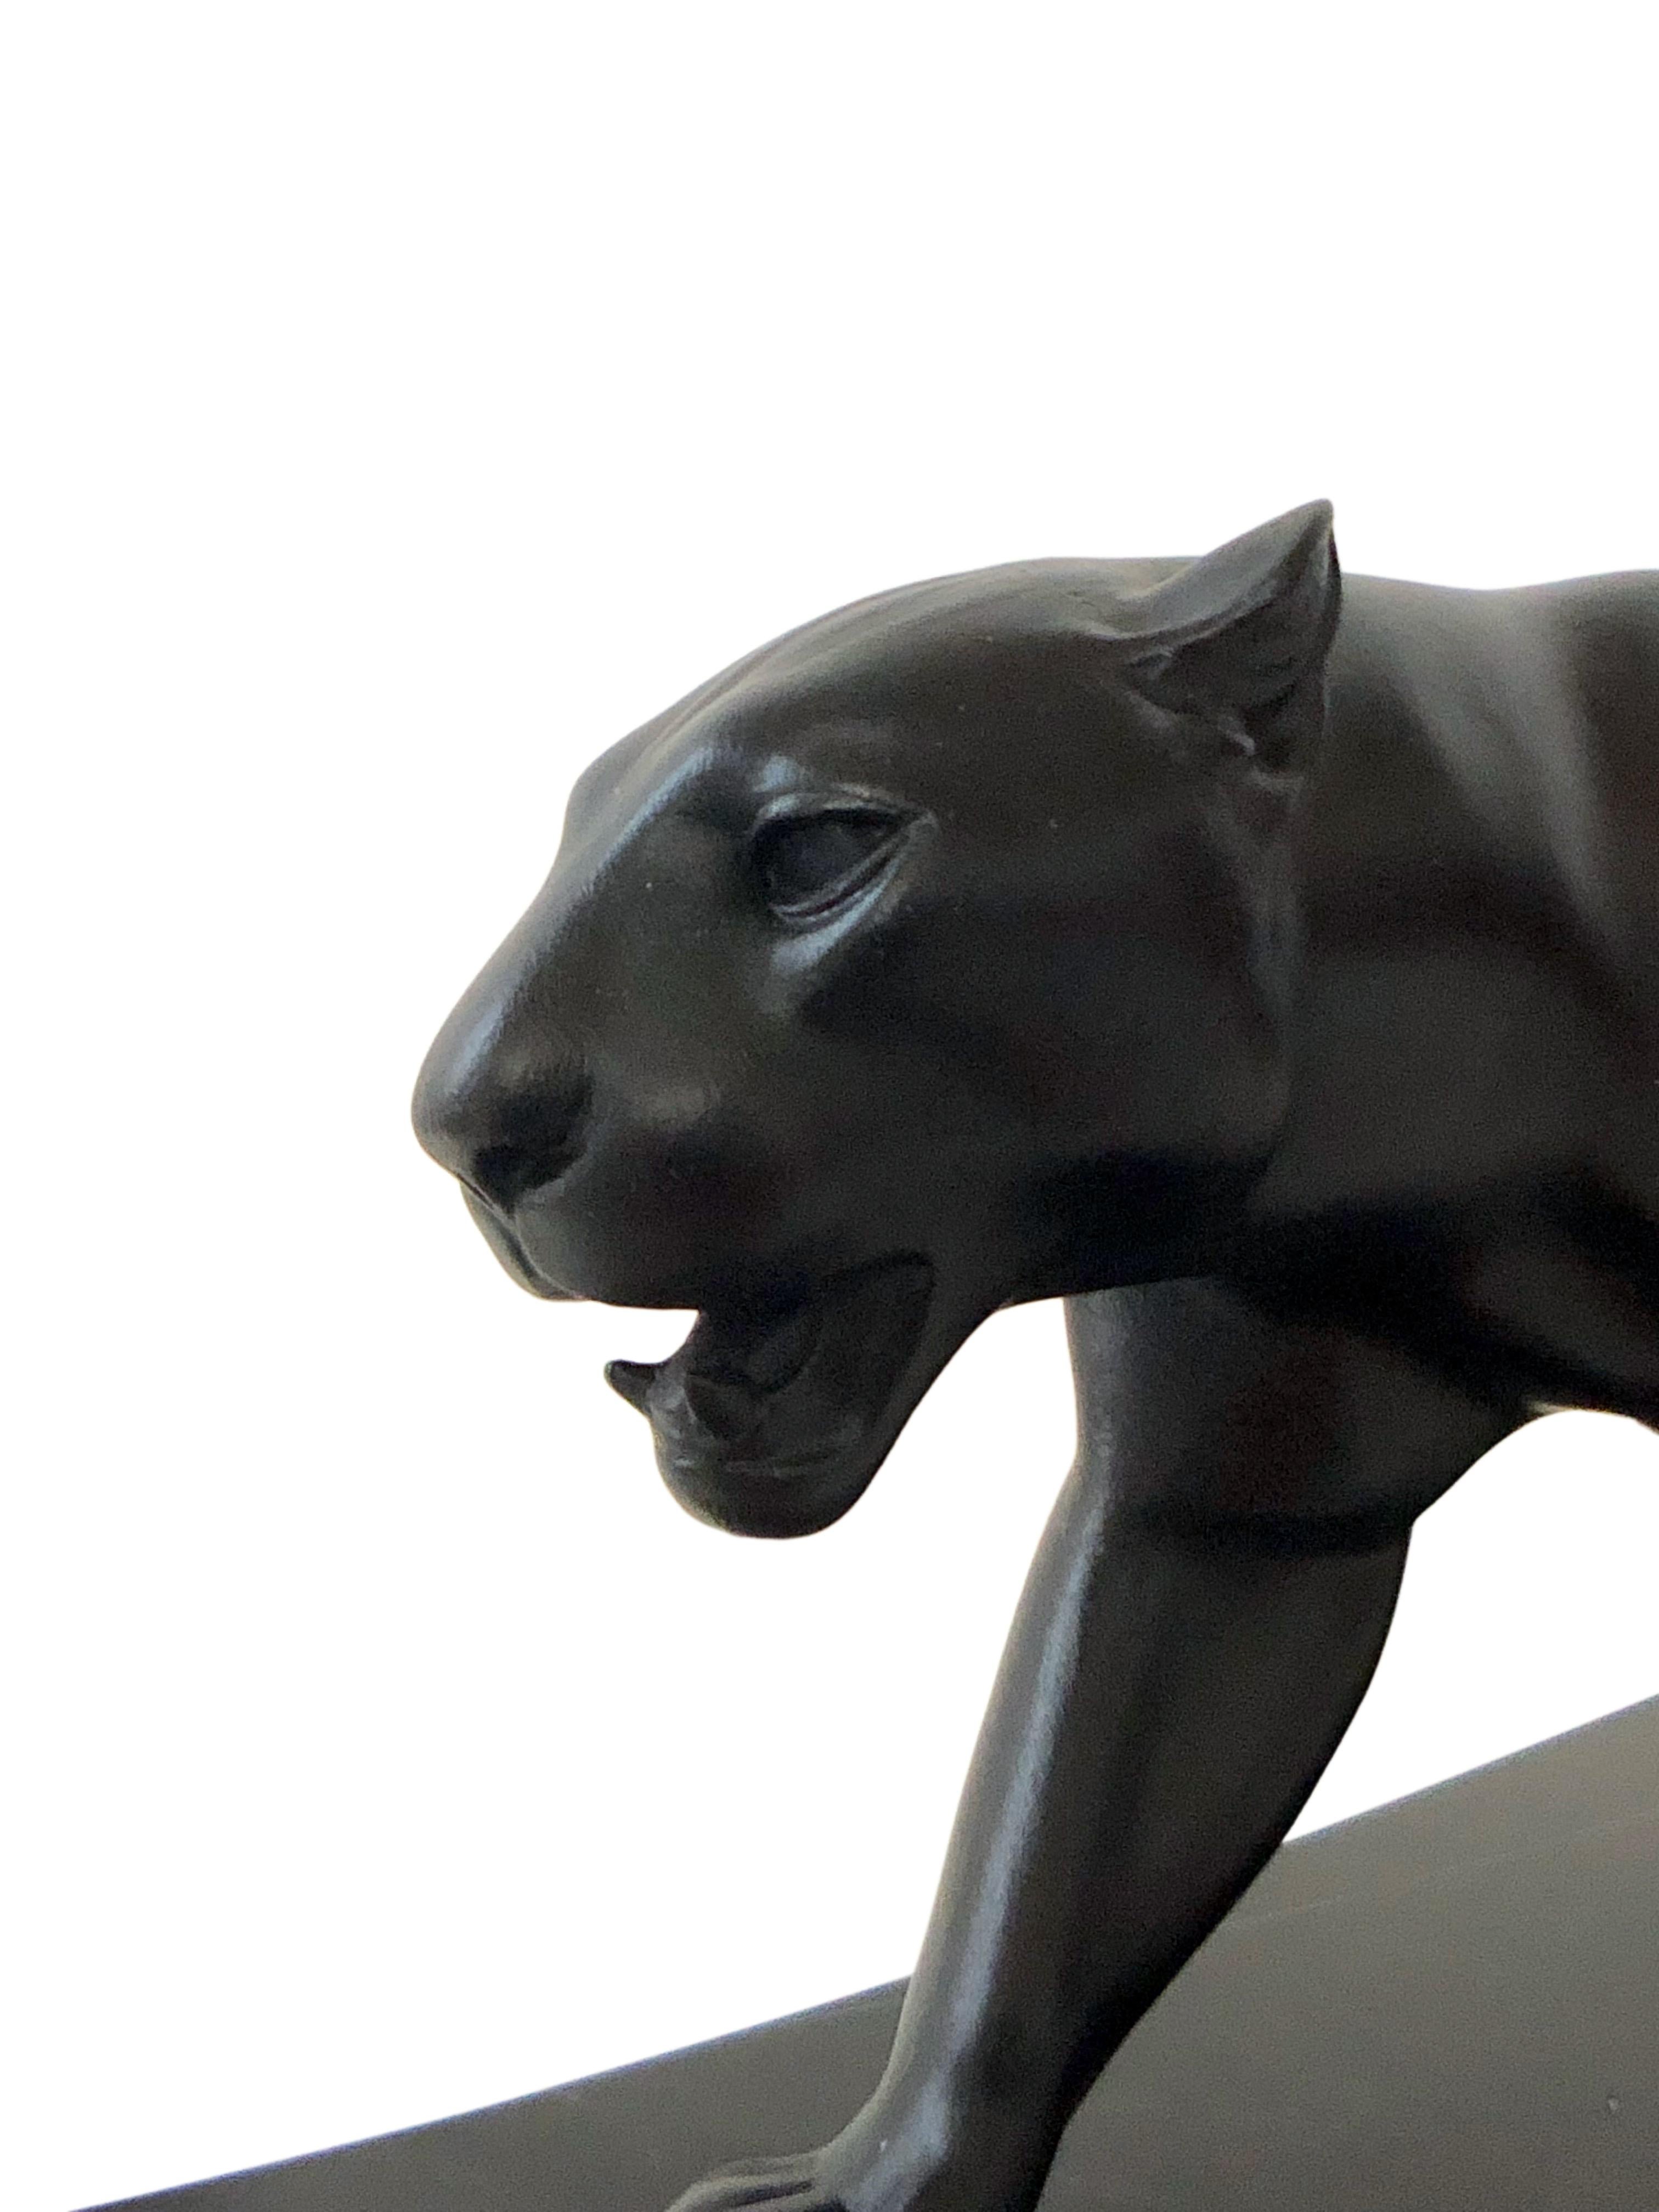 Big Lion / panther sculpture named “Baghera”
Original “Max Le Verrier”, signed
Designed in France during the roaring 1920s by “Max Le Verrier” (1891-1973)
Art Deco style, France 

Materials: patinated spelter (French: régule), marble base 
Socle